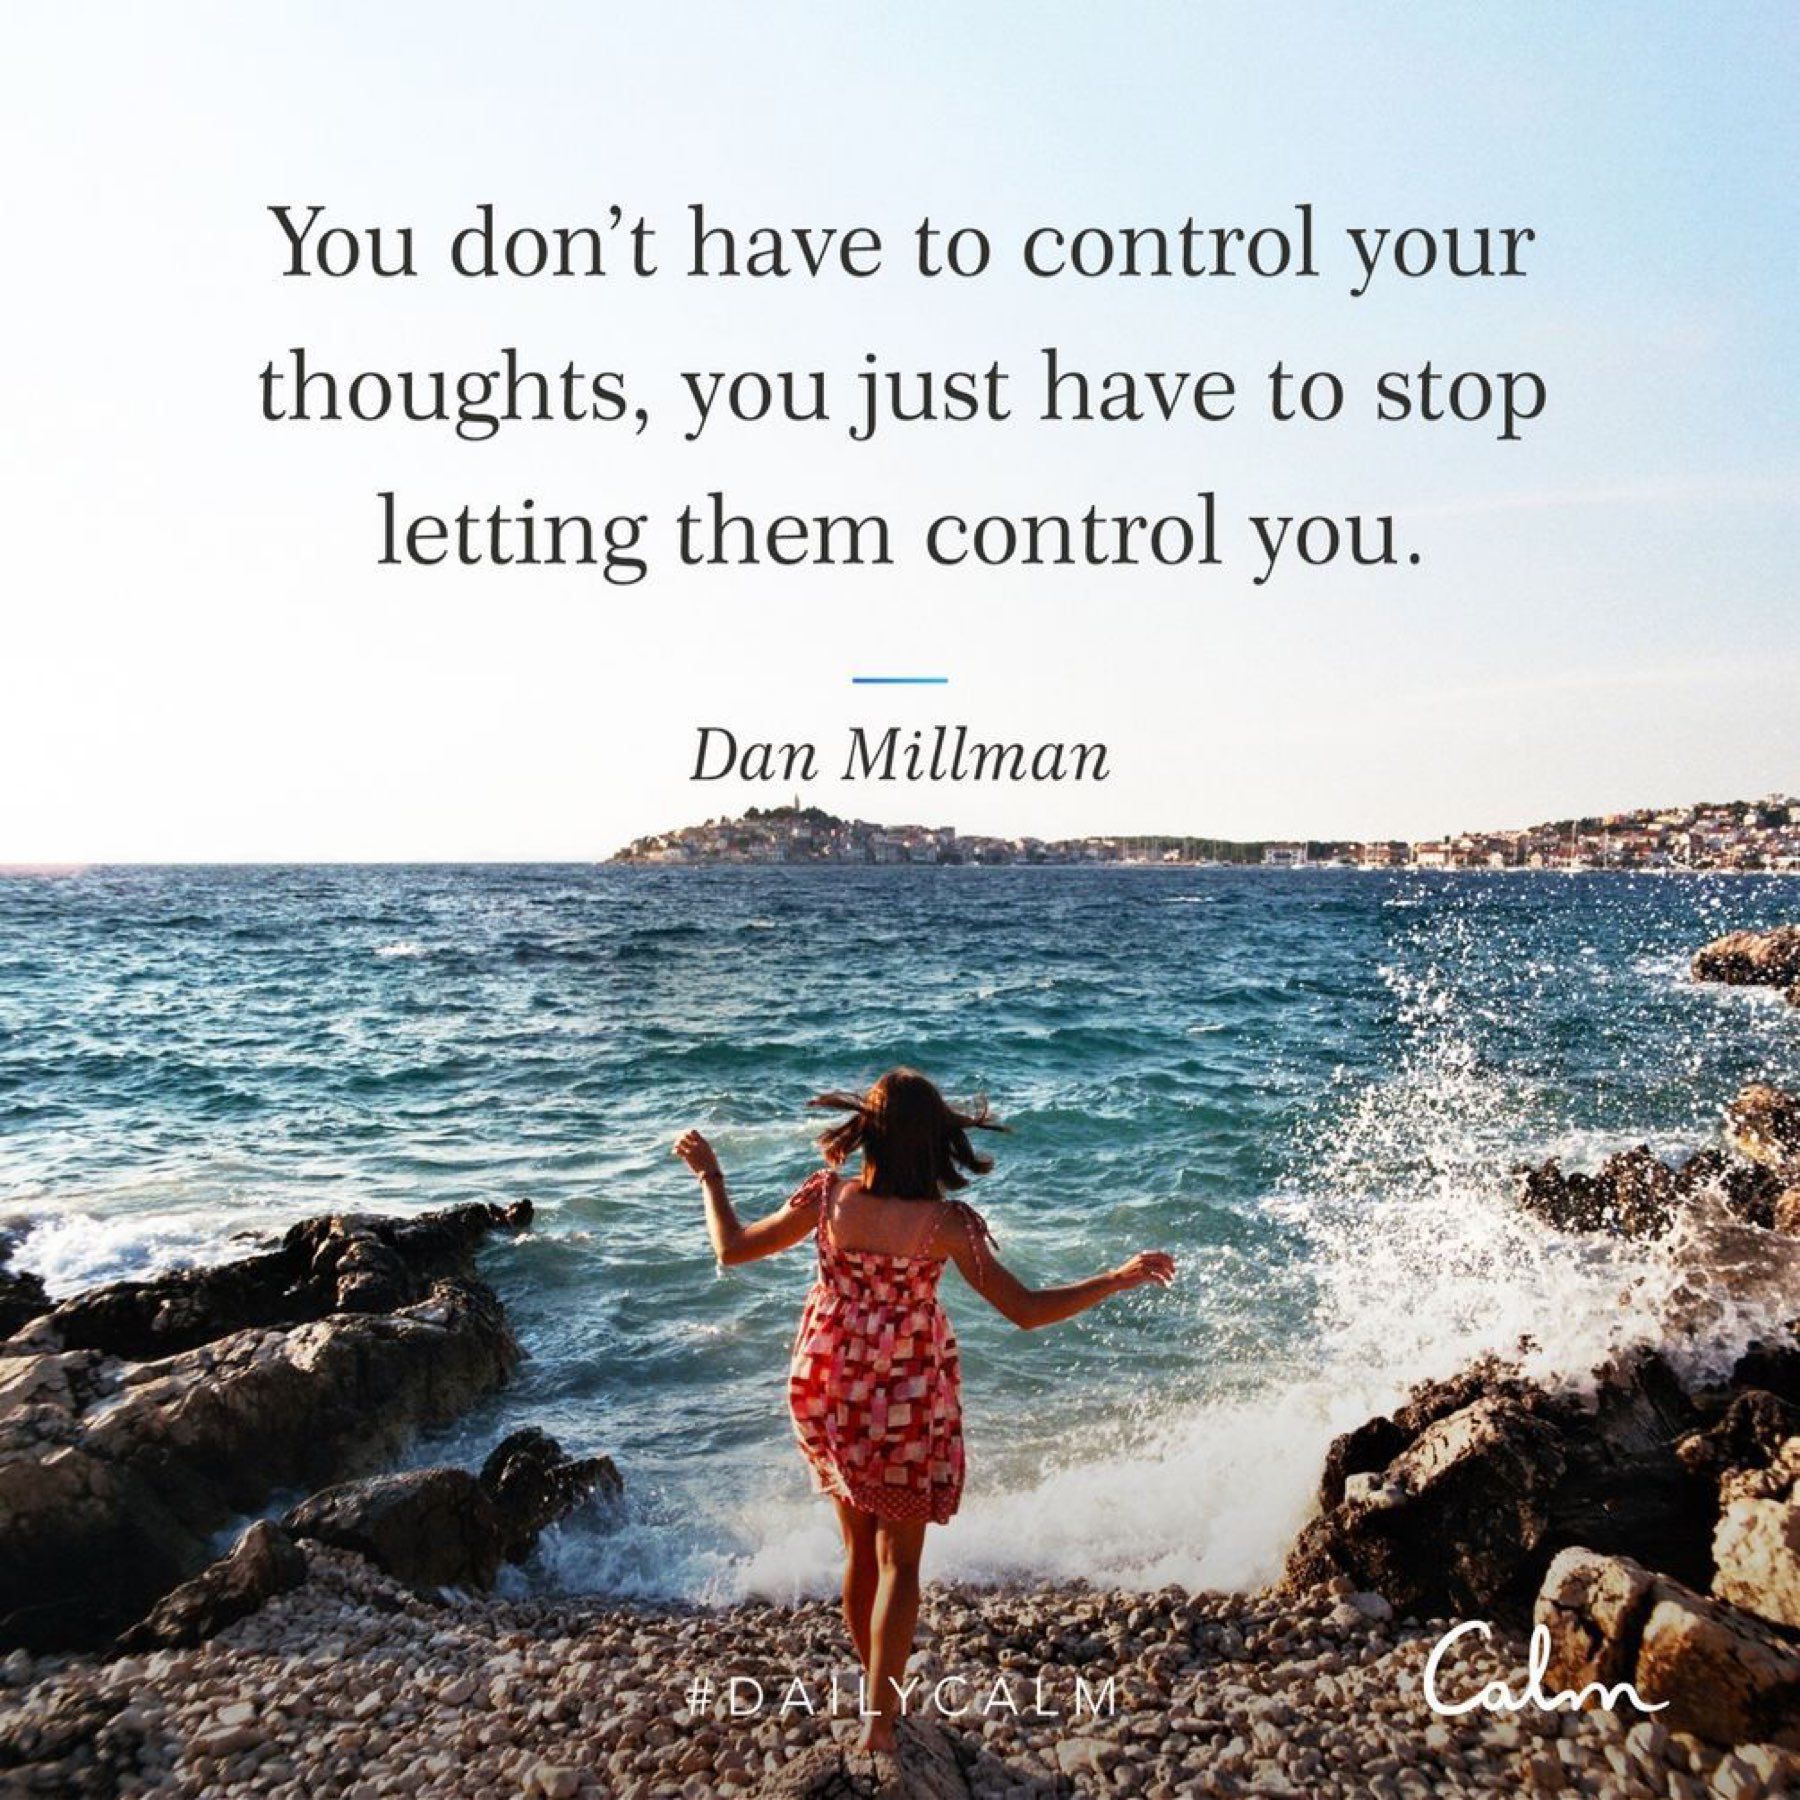 Stop letting thoughts control you